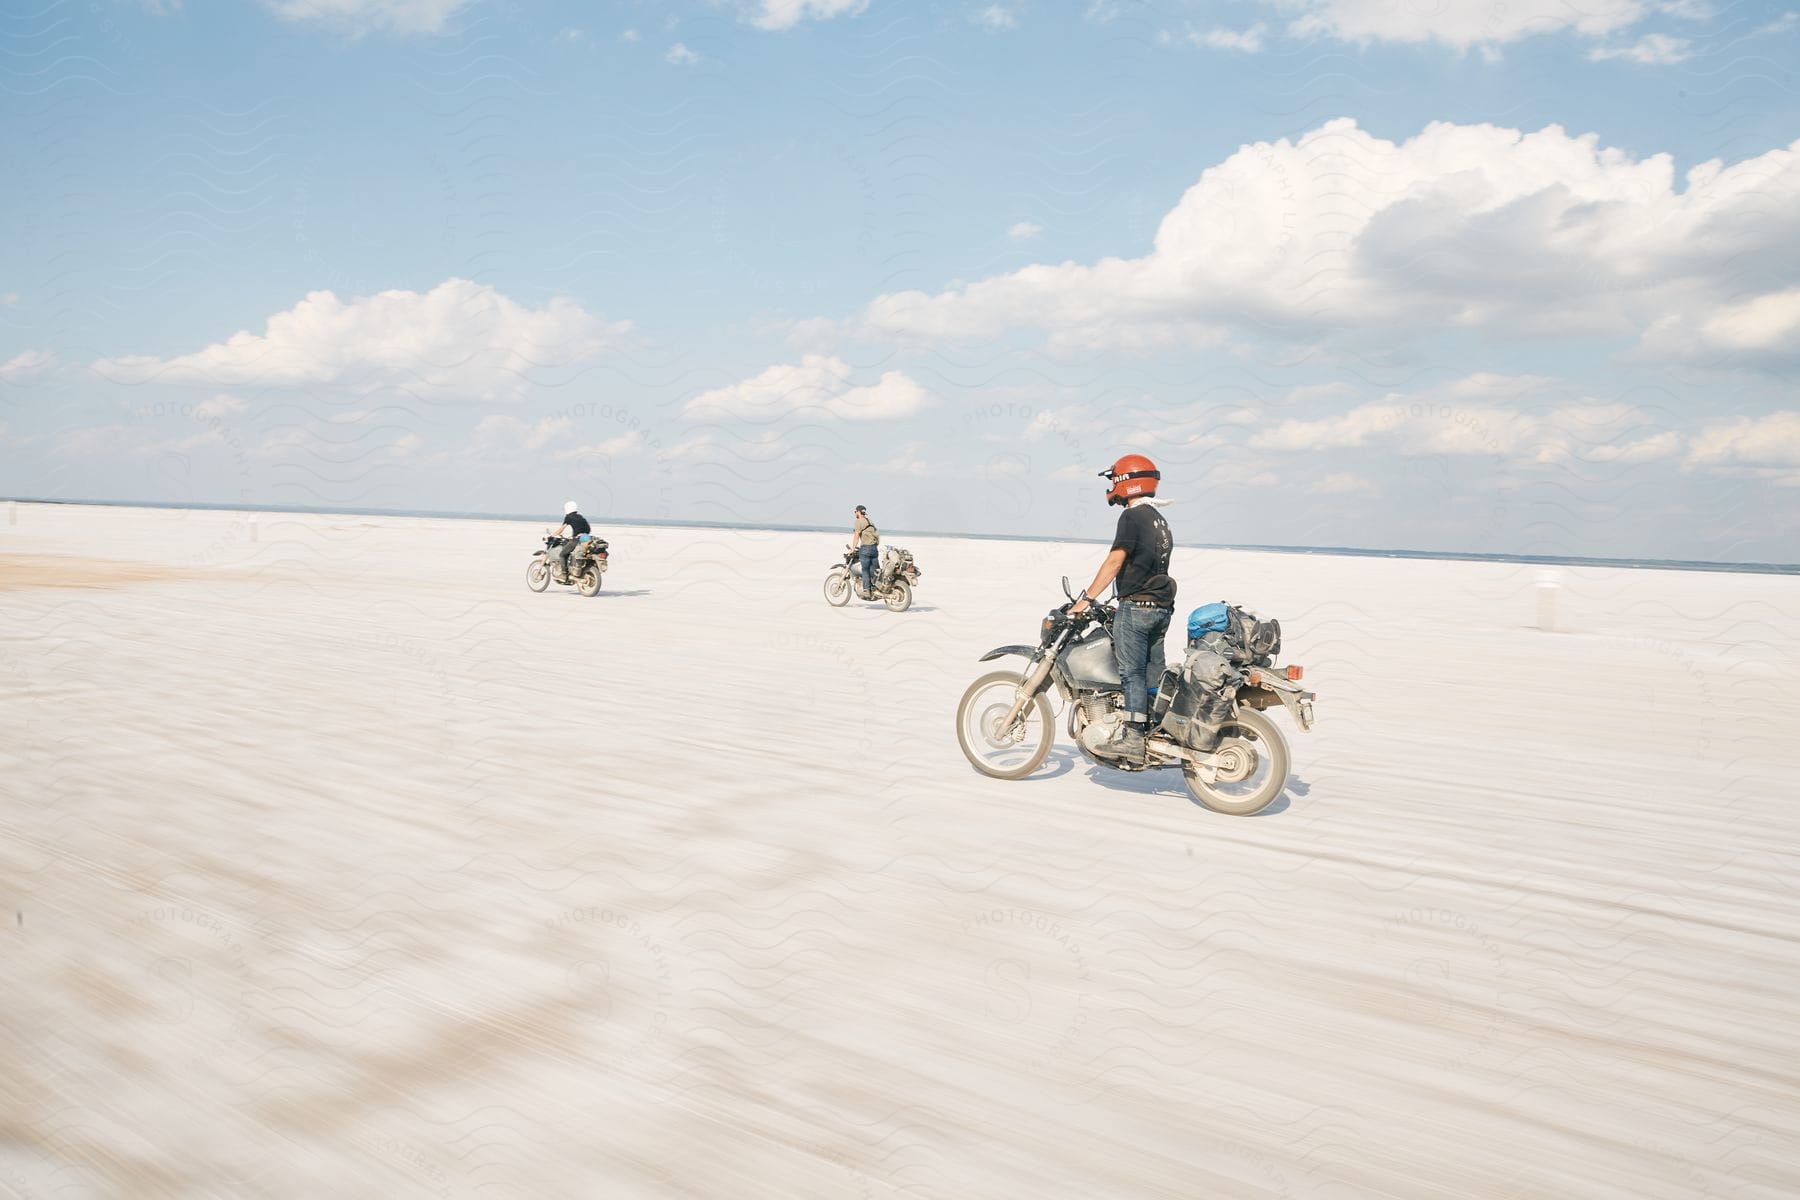 Three men riding motorcycles at full speed in a large desert during the daytime